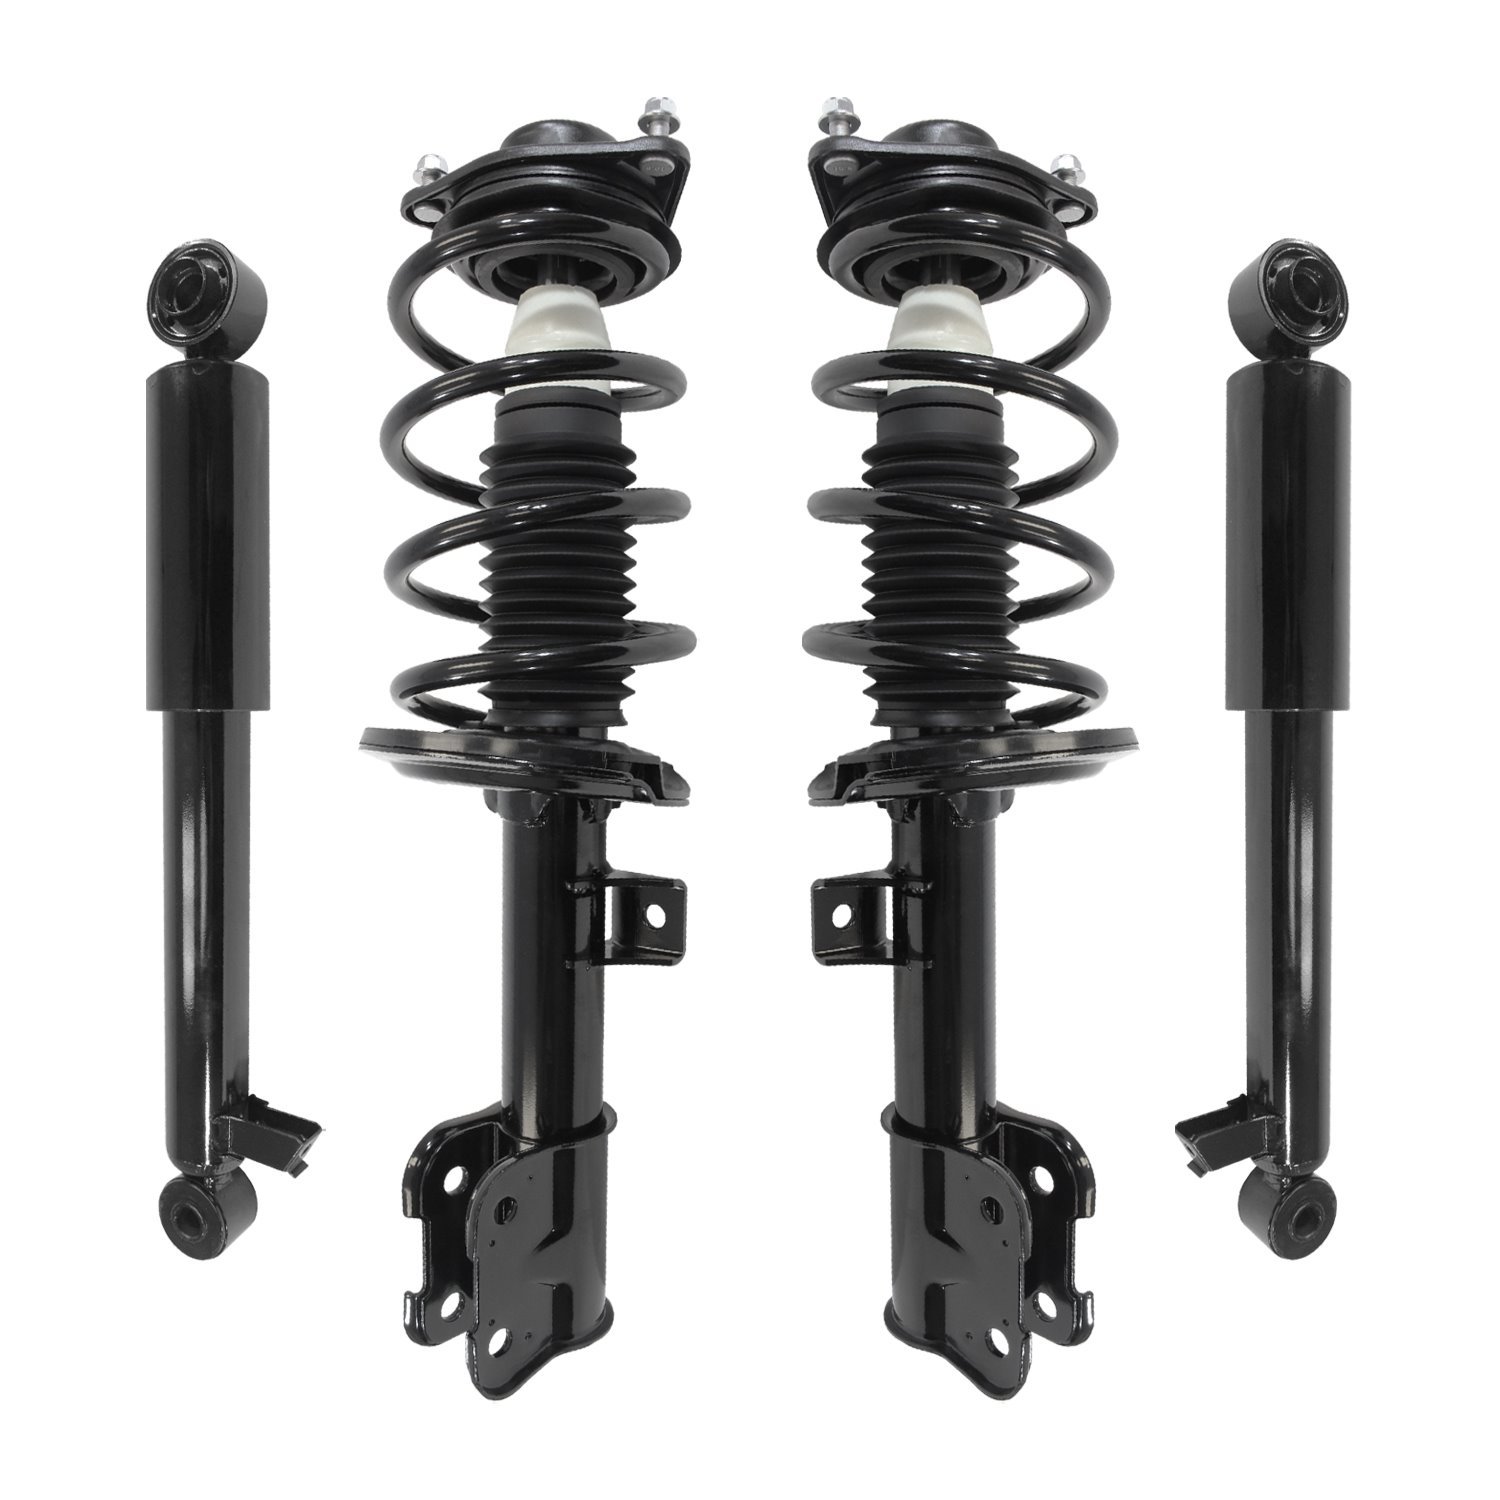 4-11365-259060-001 Front & Rear Suspension Strut & Coil Spring Assembly Fits Select Kia/Hyundai